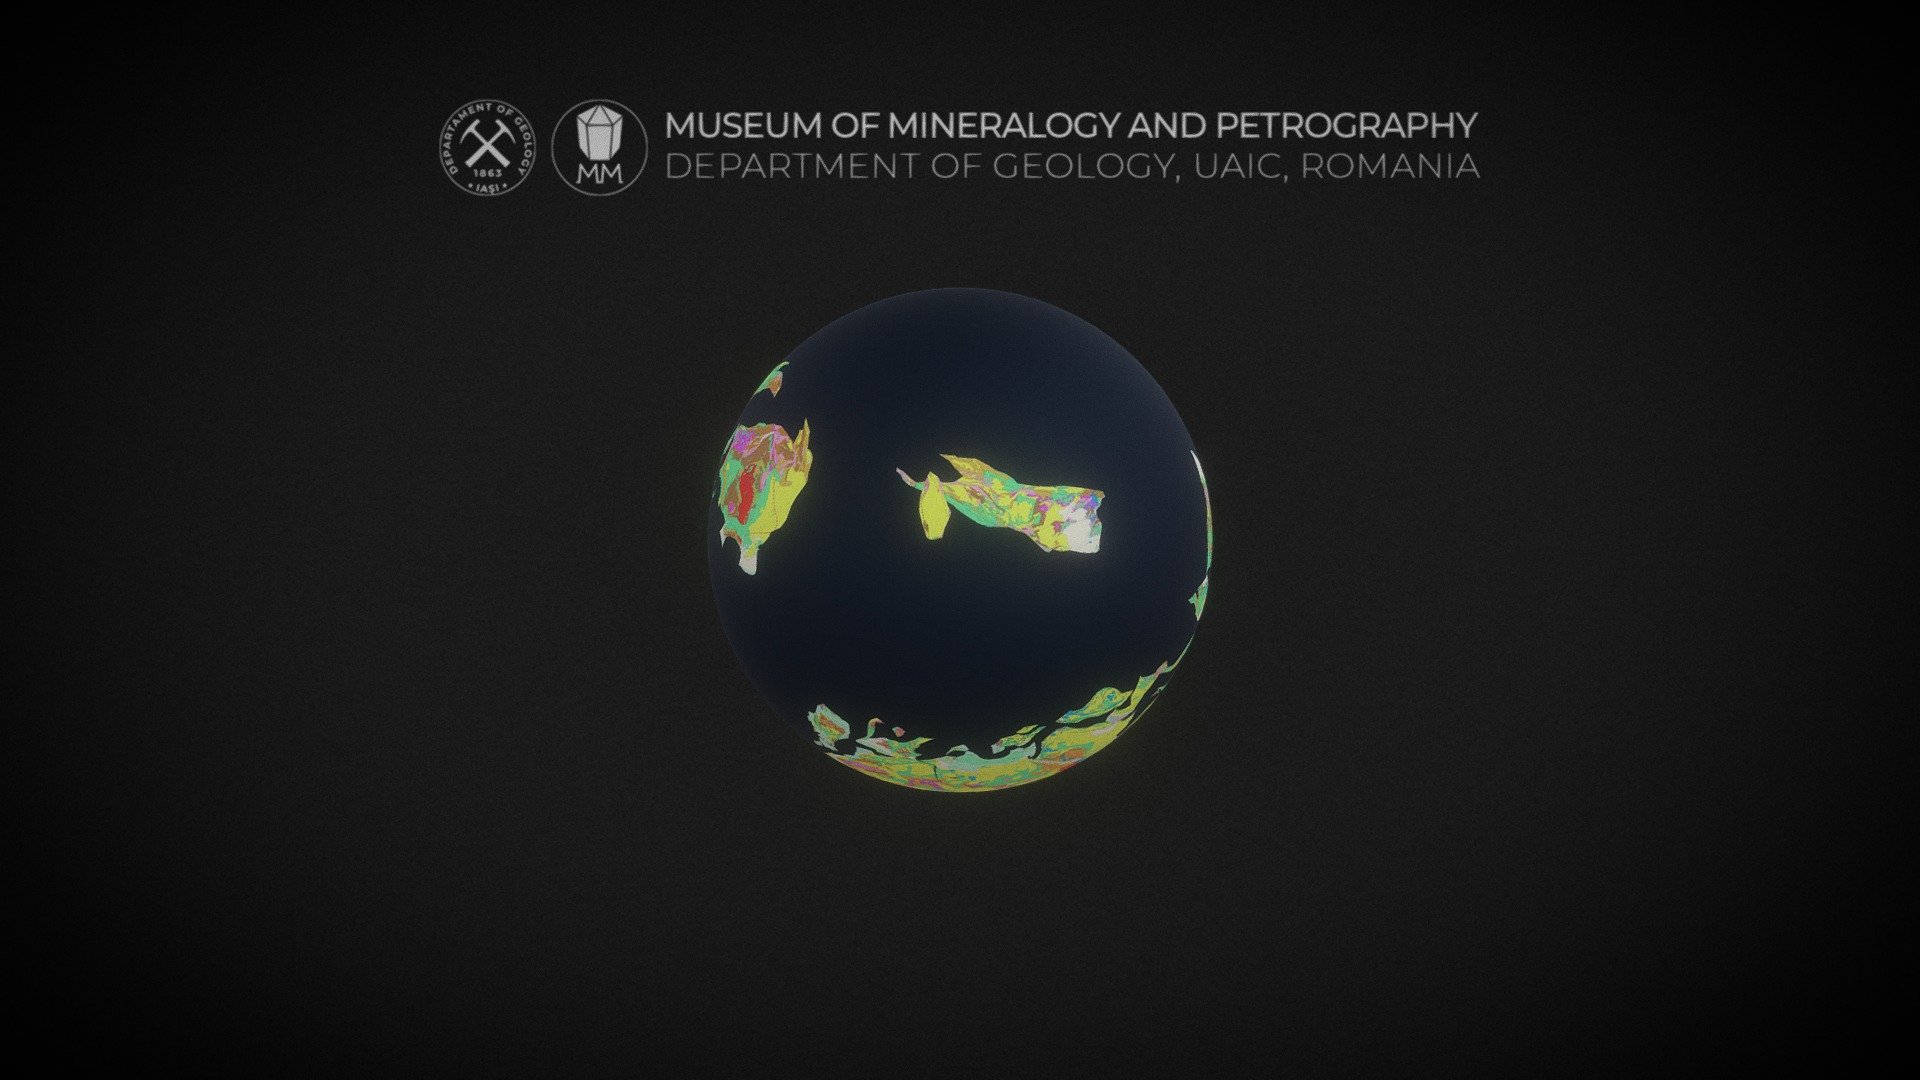 Geological Map of the World at 1:35 M - animated